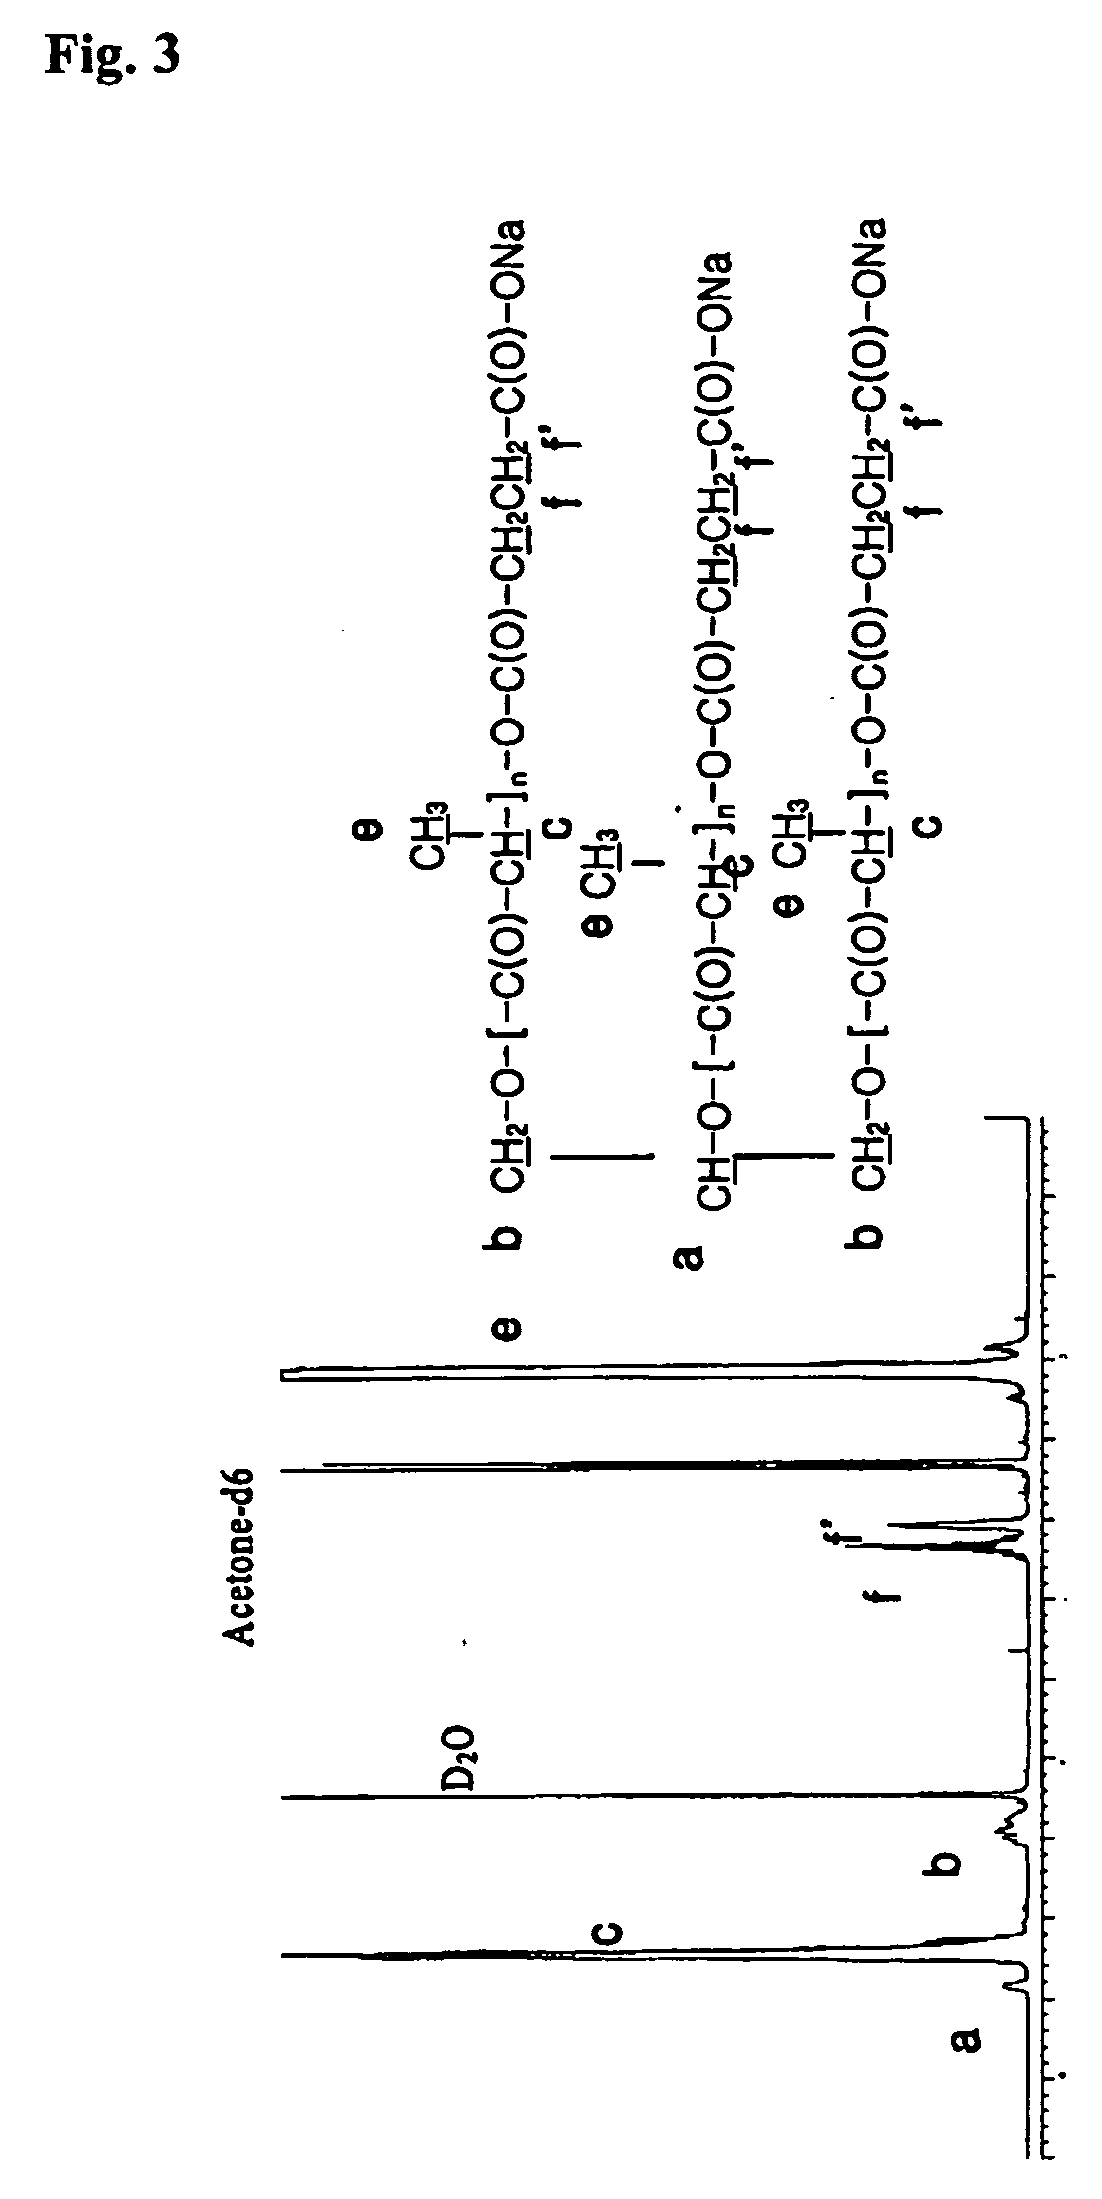 Biodegradable branched polylactide derivatives capable of forming polymeric micelles, and their preparation method and use